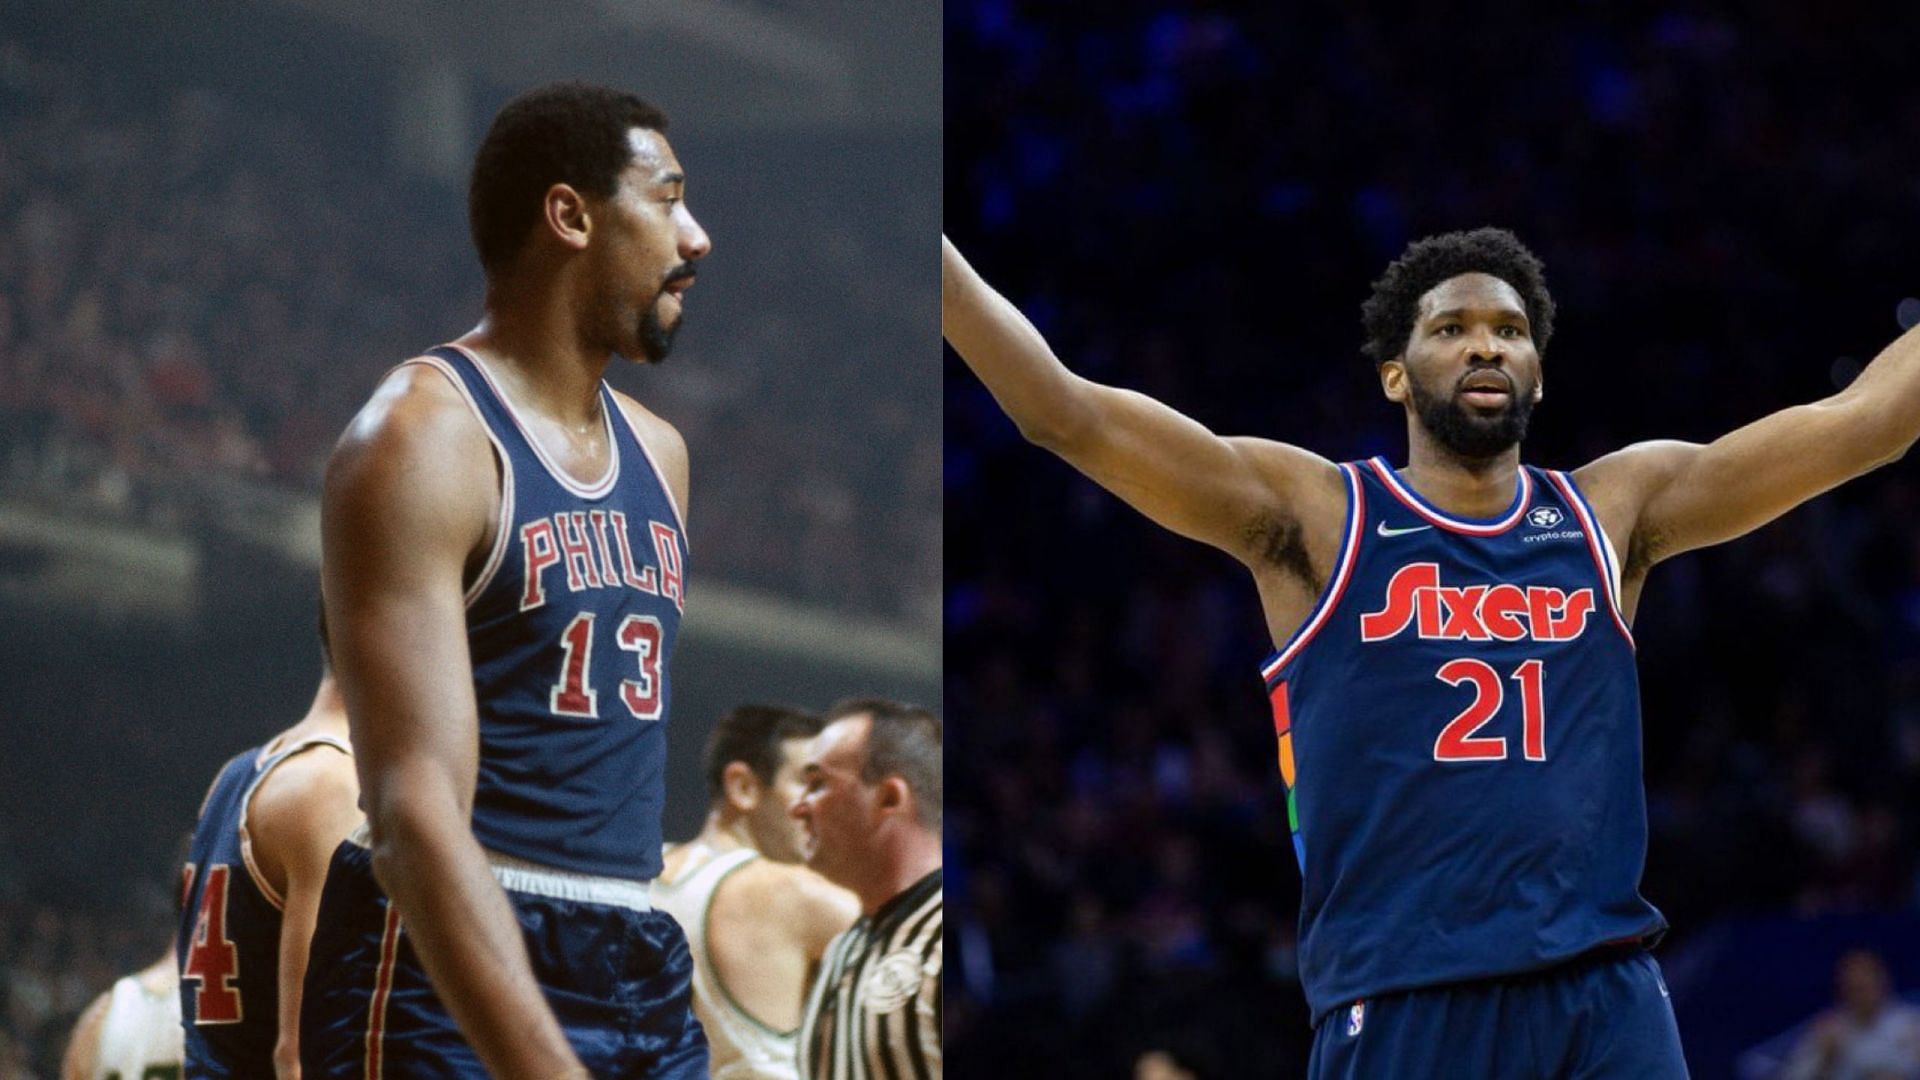 Joel Embiid surpasses points over minutes played, joining only Wilt Chamberlain